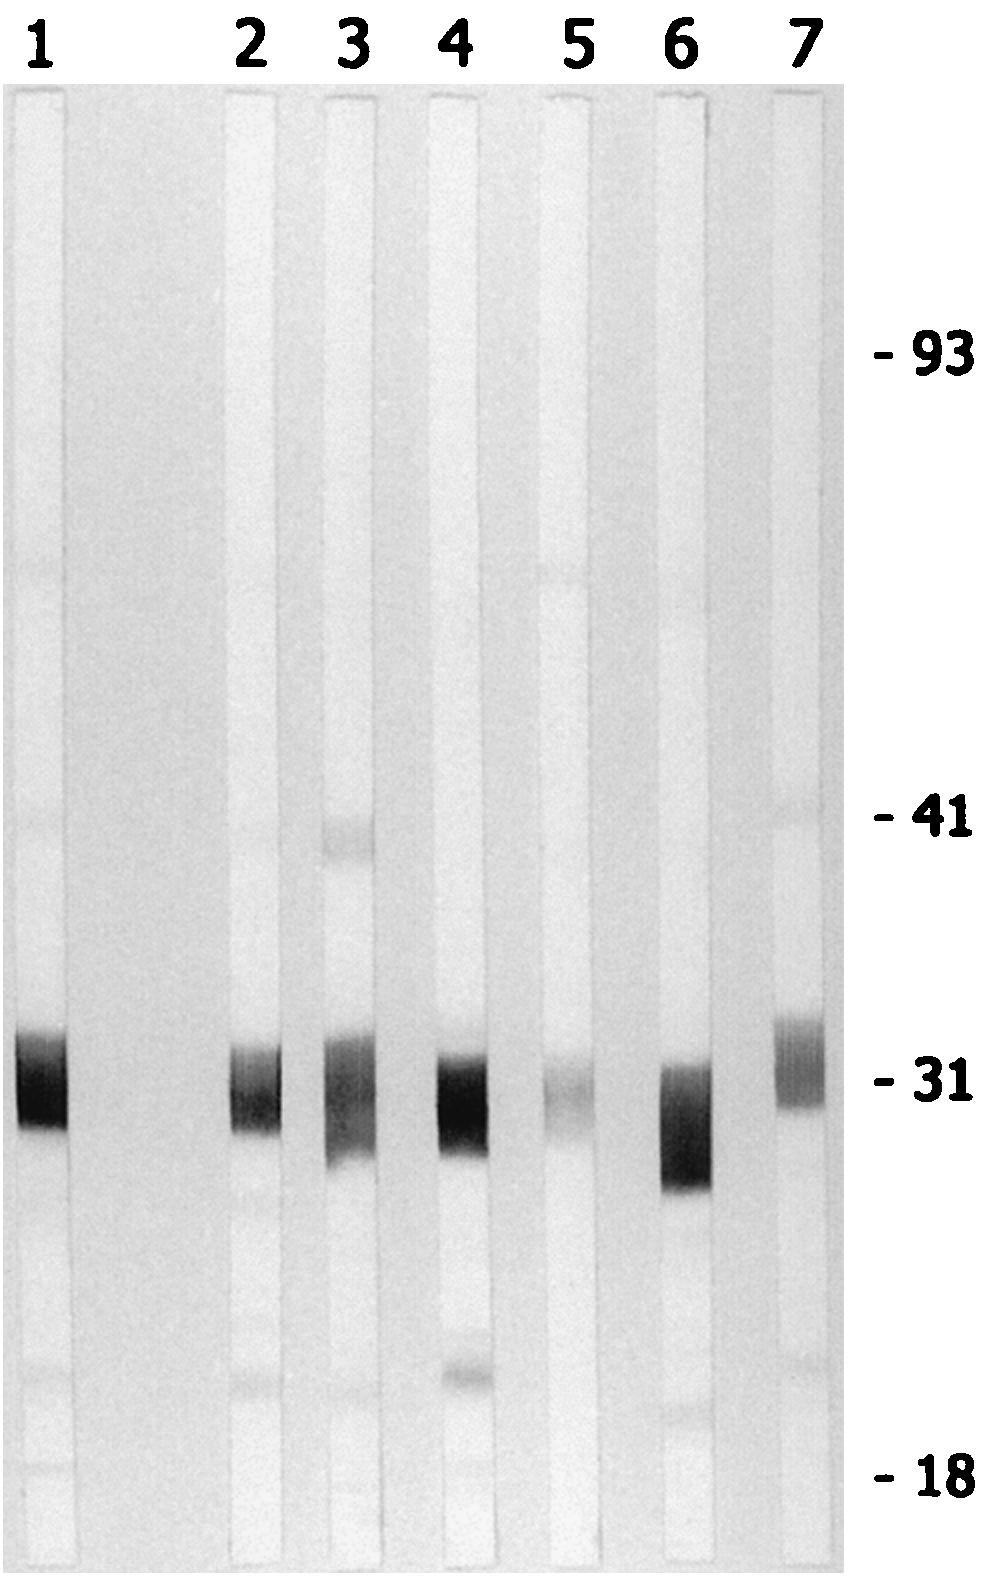 Selected dot blot test strips for detection of IgG antibodies from a B. burgdorferi-infected mouse (Bb) and three mice which received two doses of OspA vaccine (M1 to M3) are shown.